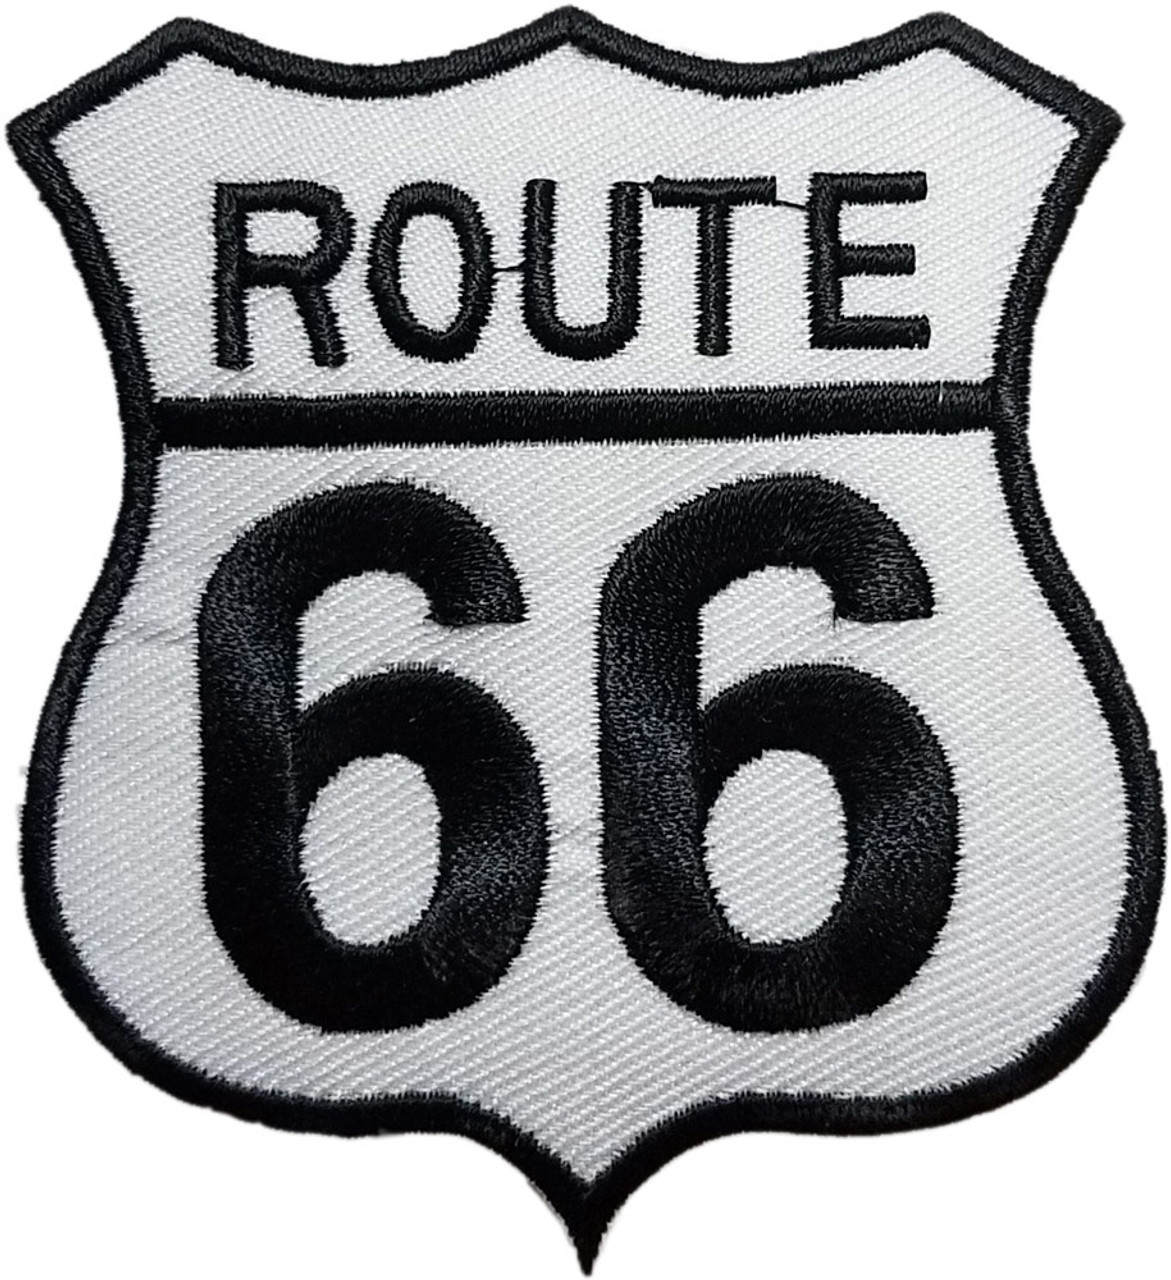 Route 66 Embroidered Sew On Patch - 2 3/4